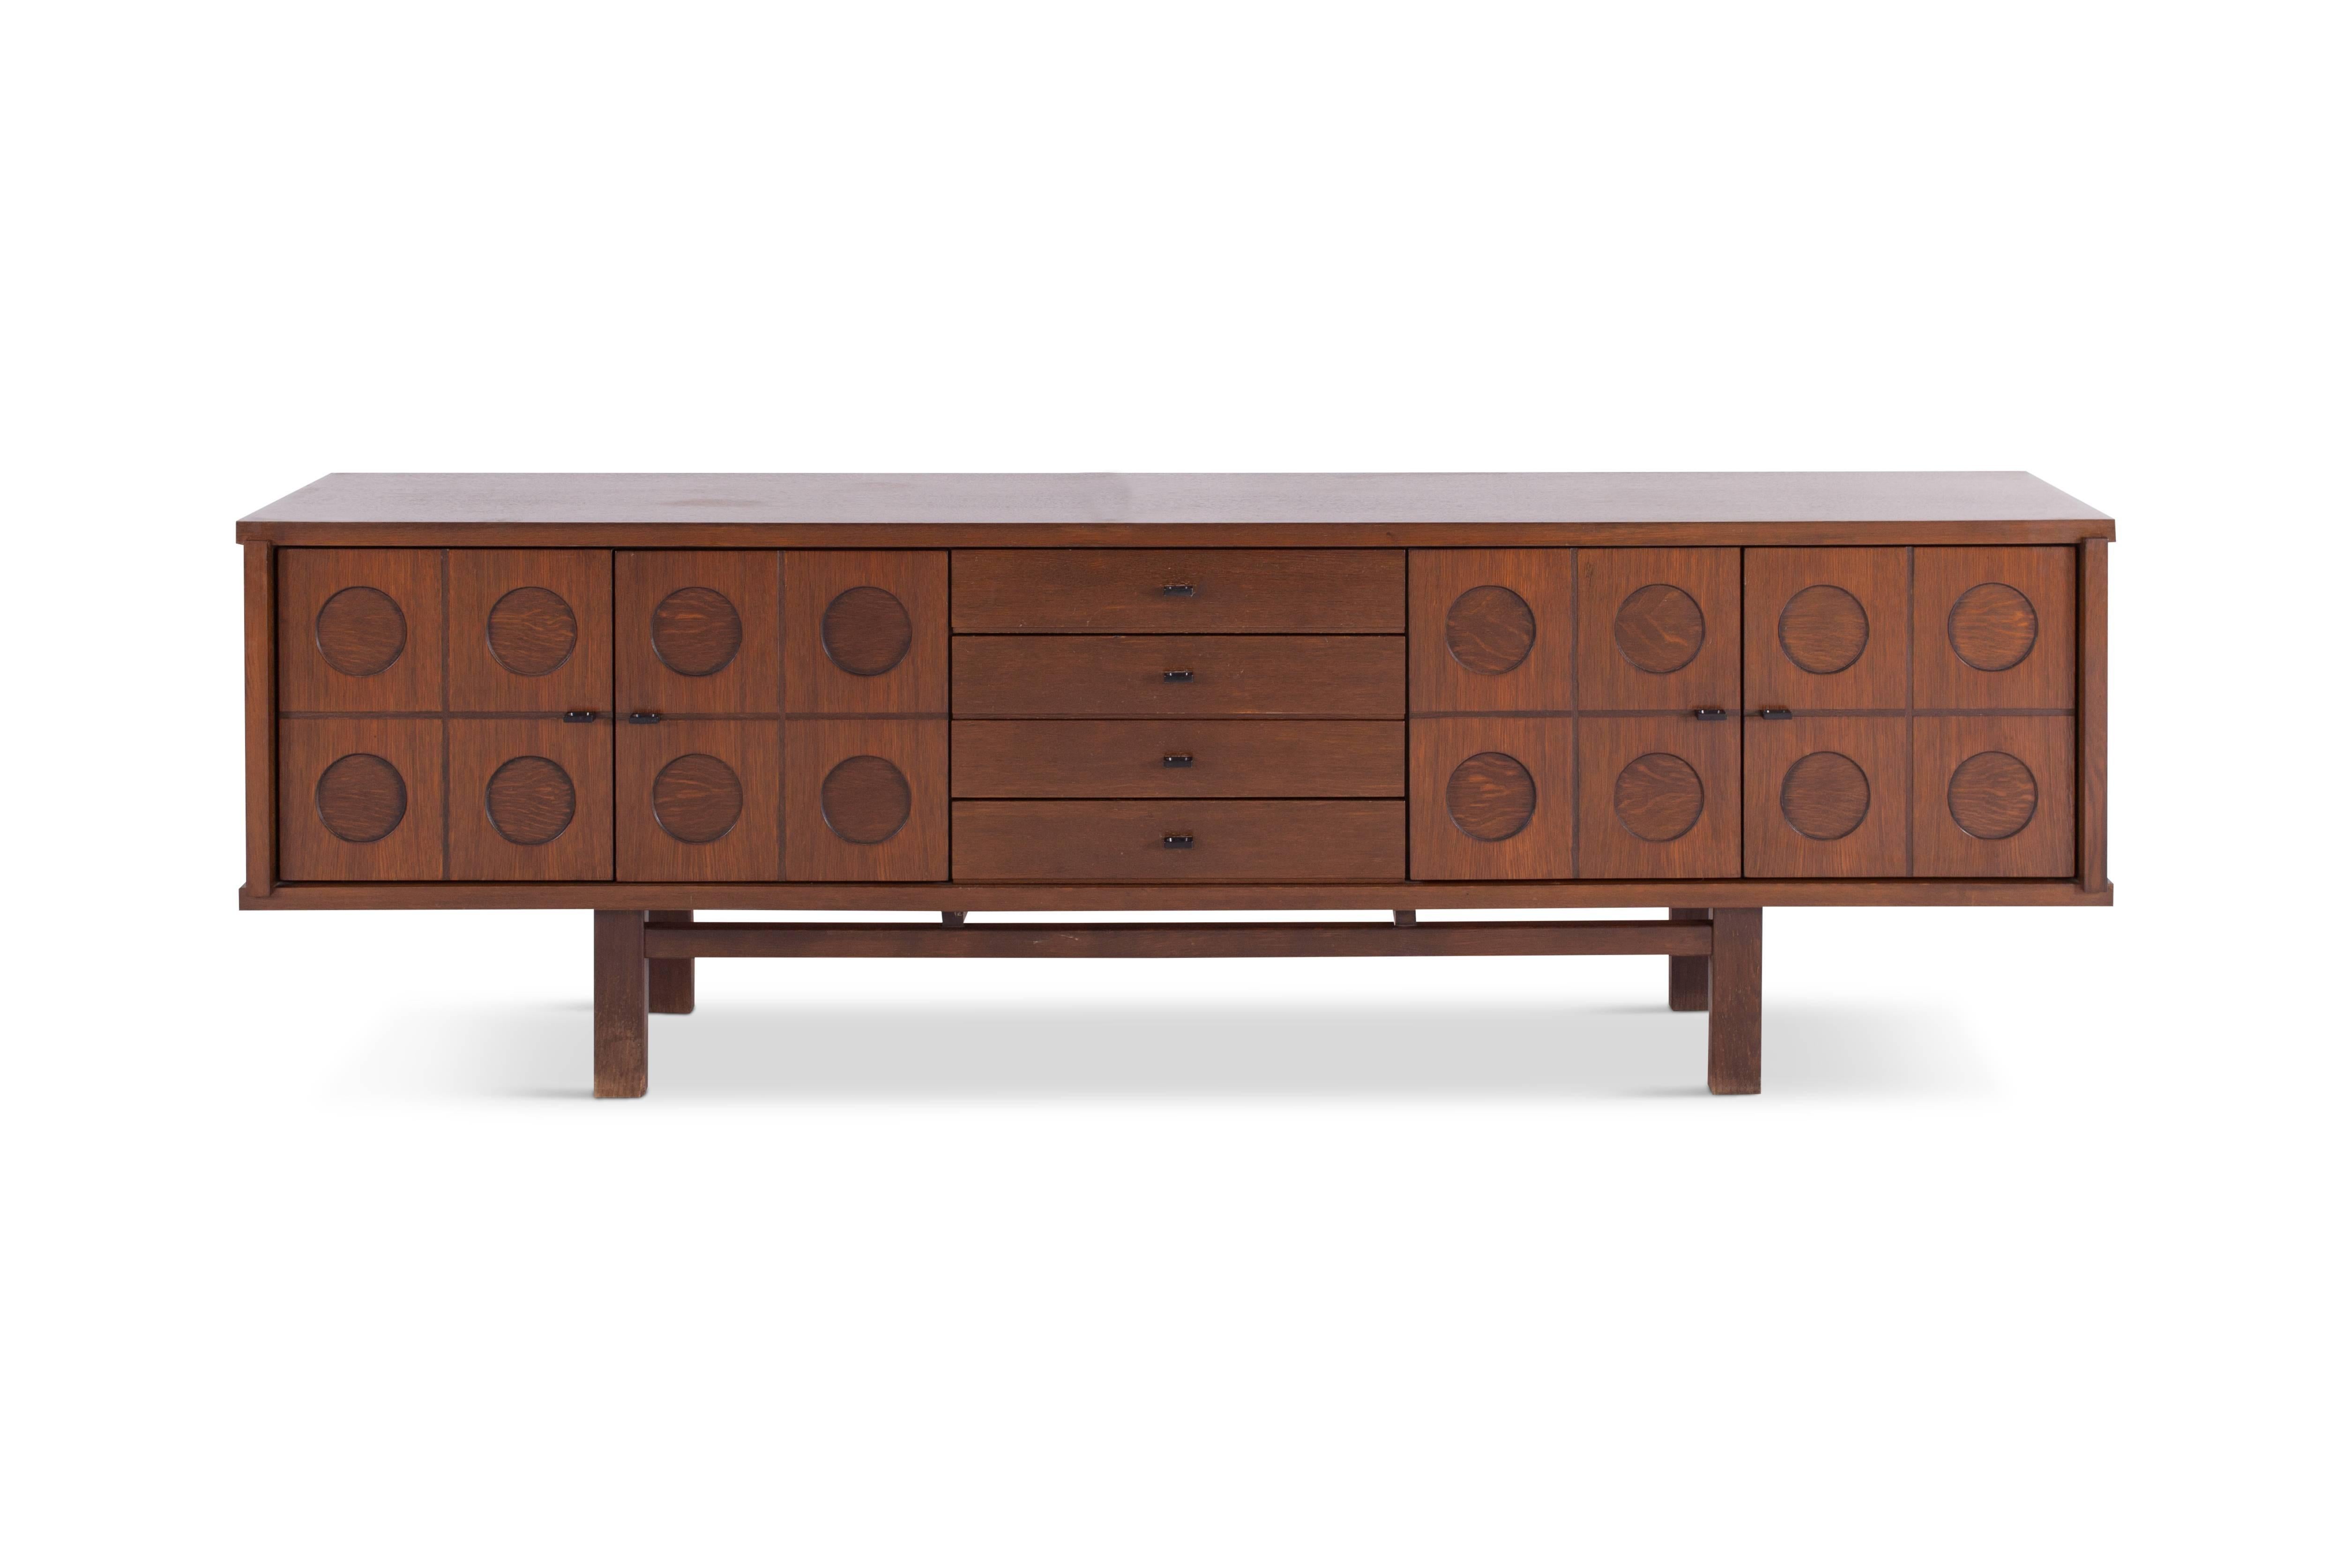 Brutalist sideboard in brown oak.
A rare brutalist piece mounted on a base for a floating effect.

Inside we find plenty of storage space.

Belgium, 1970s.

Measures: W 283 x H 88.5 x D 48.5 cm.